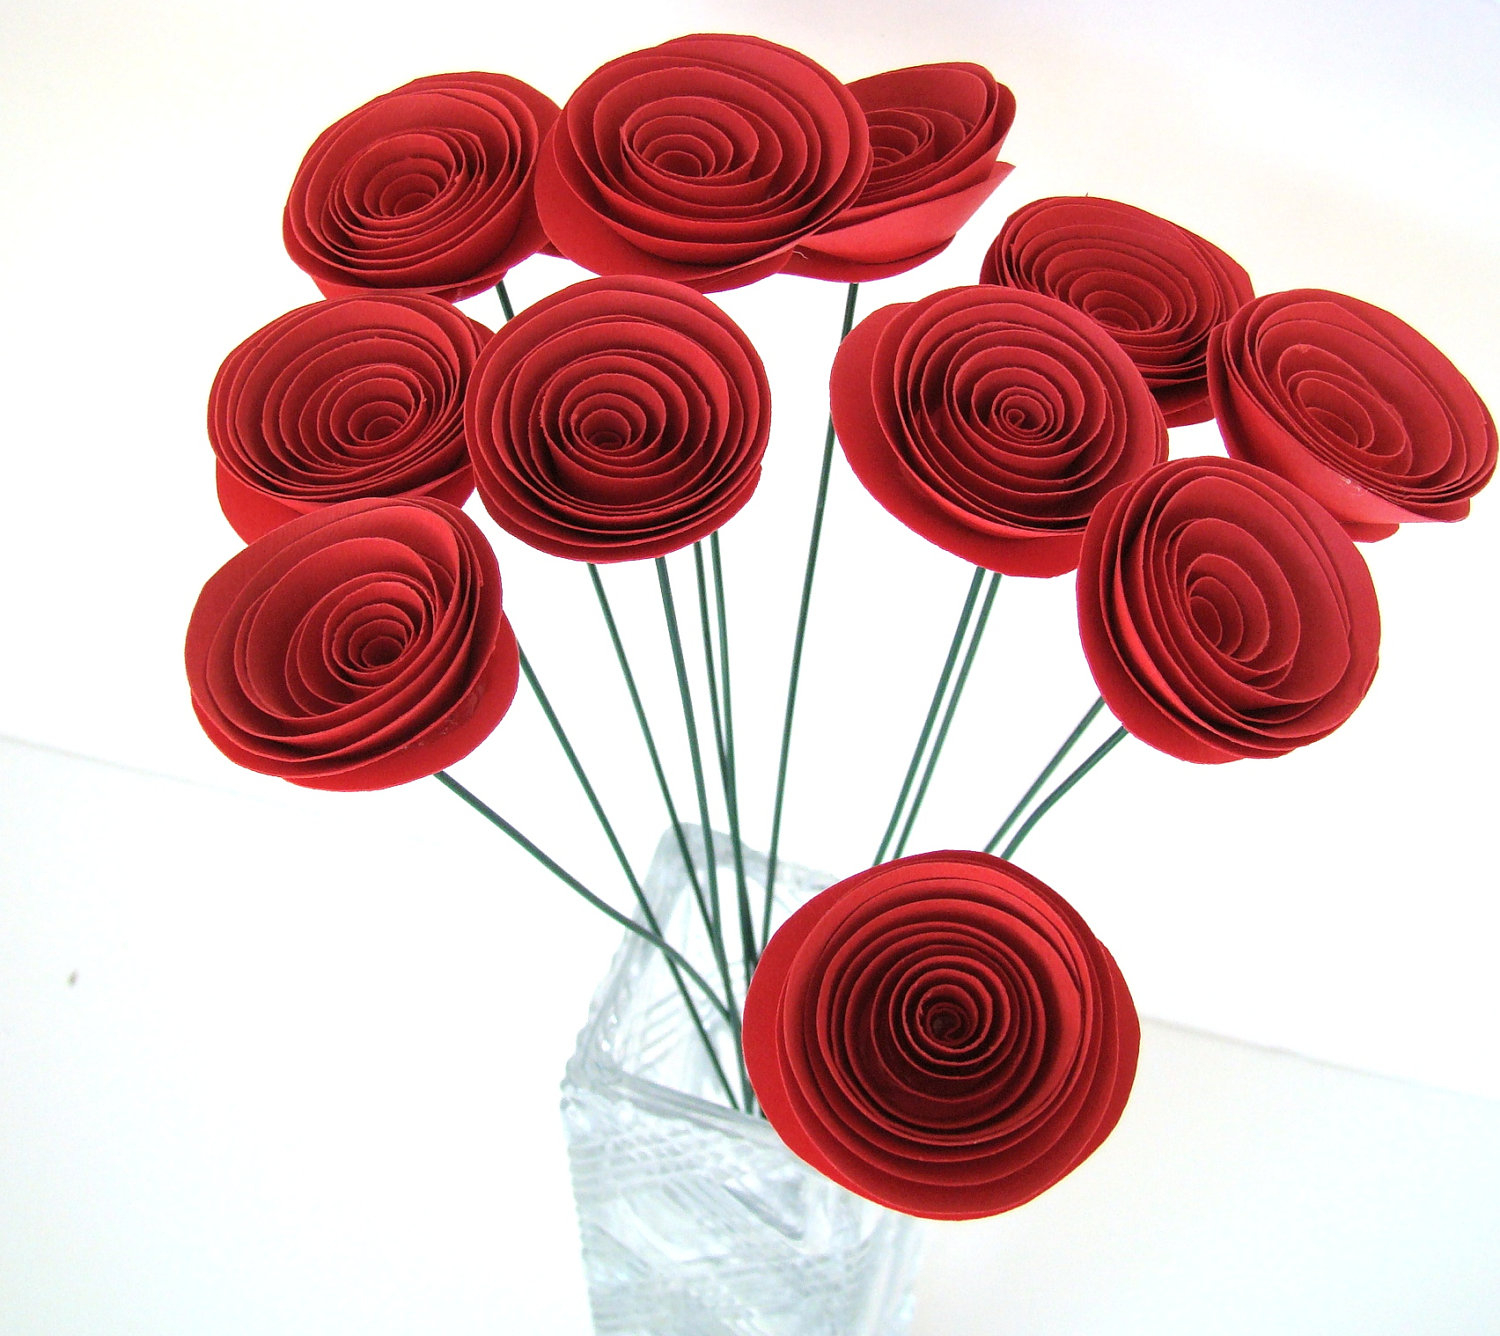 Paper Rose Origami Small Red Roses One Dozen Spiral Paper Roses With Stems From Origami Delights